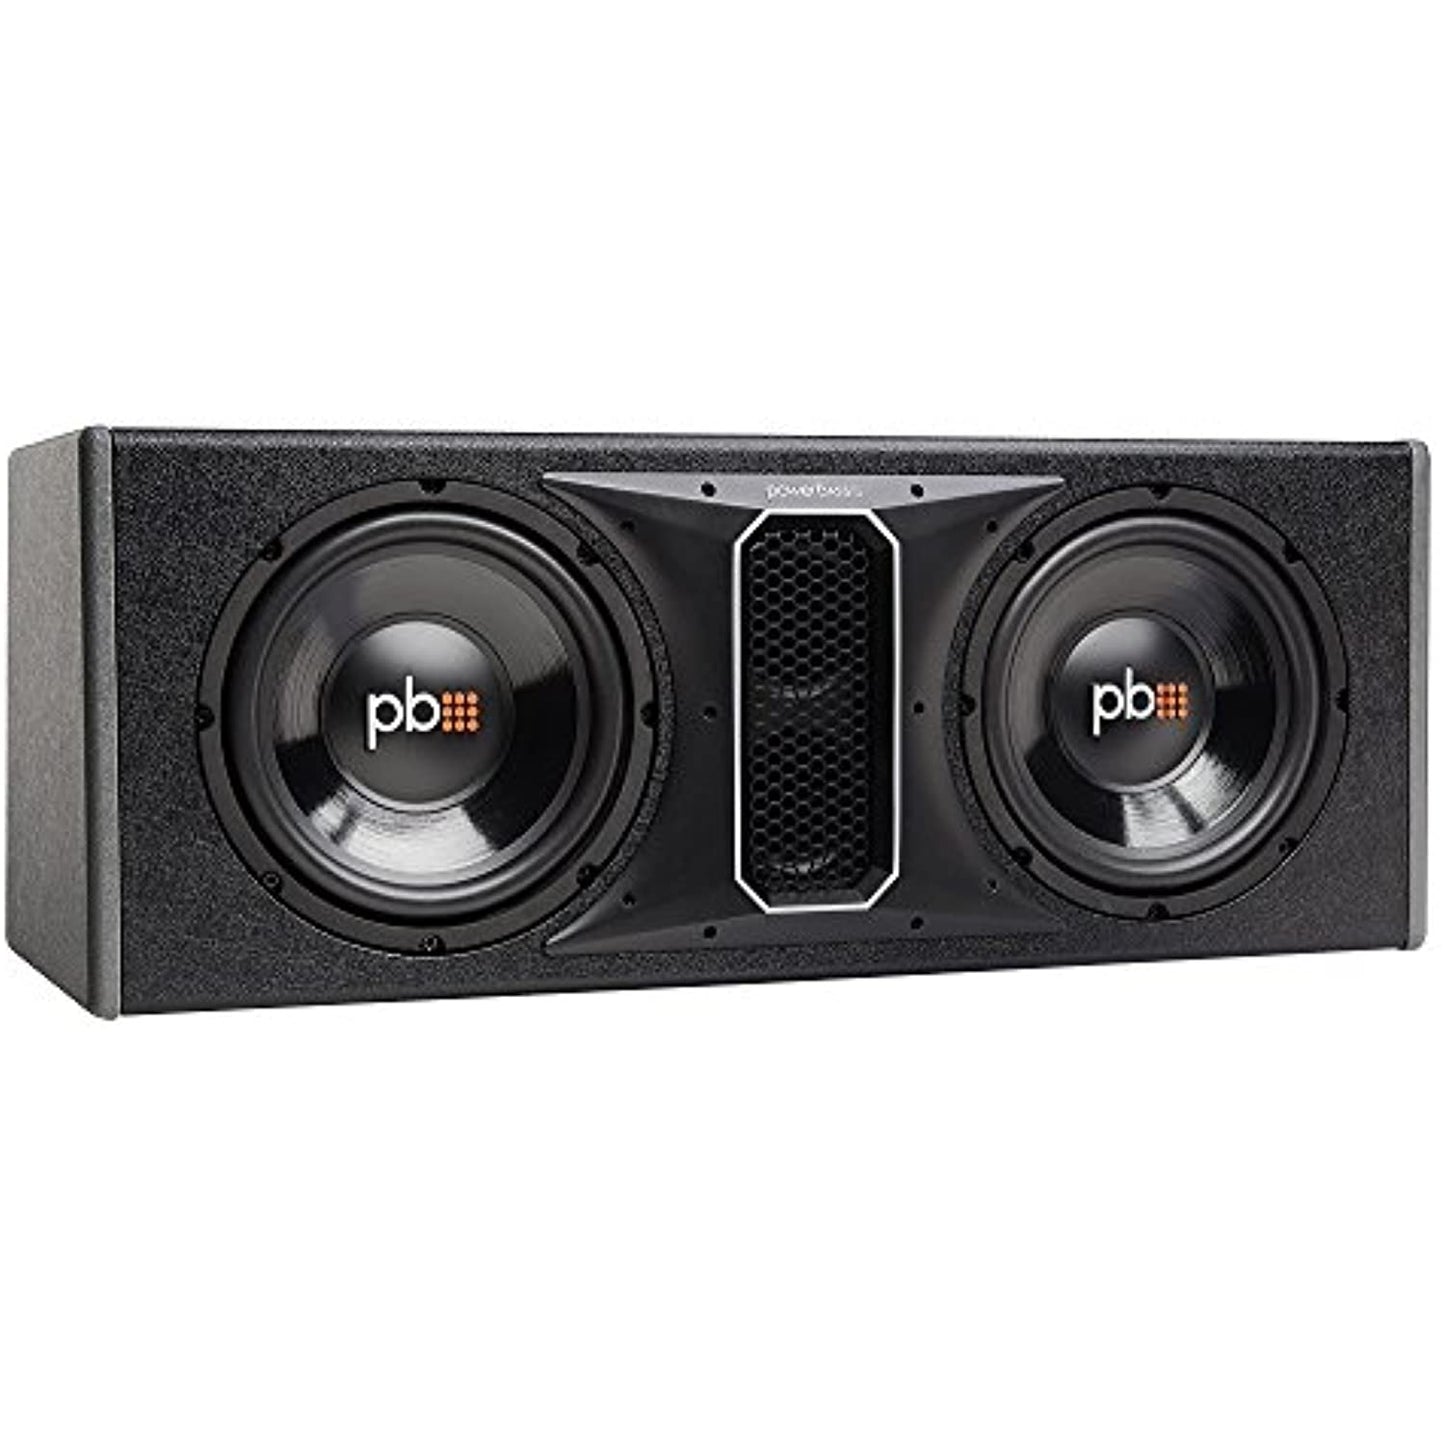 Powerbass Powerbases 10" Dual Subwoofer Enclosure Sound System (PSWB102)